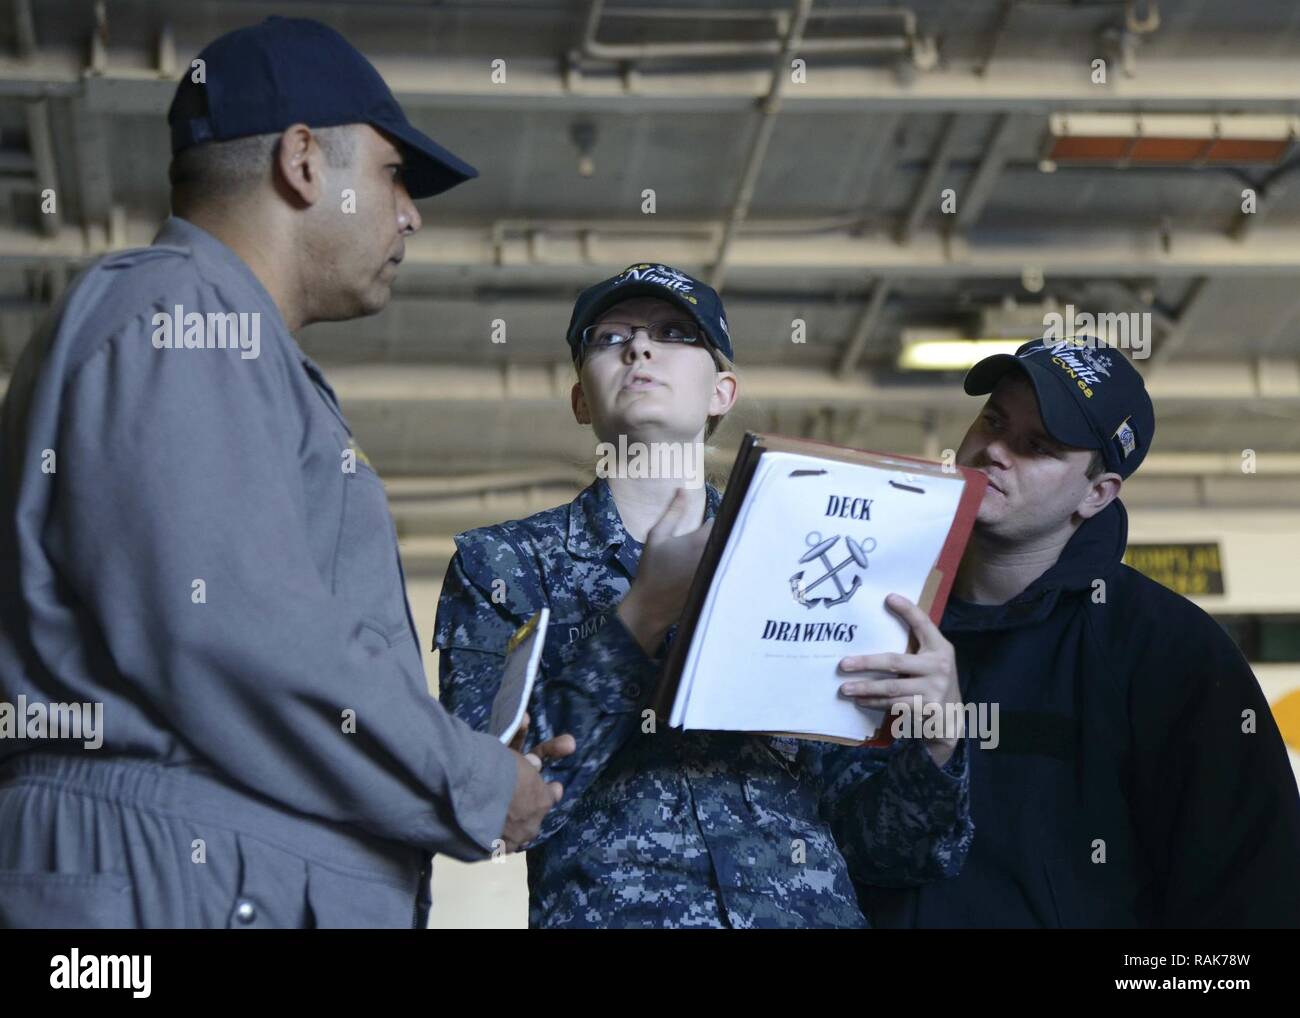 SAN DIEGO (Feb. 13, 2017) - Lt. Richard Barr, a member of the Board of Inspection and Survey (INSURV) team, speaks with Sailors during a demonstration on board the aircraft carrier USS Nimitz (CVN 68). Nimitz is currently undergoing INSURV in preparation for an upcoming 2017 deployment. Stock Photo